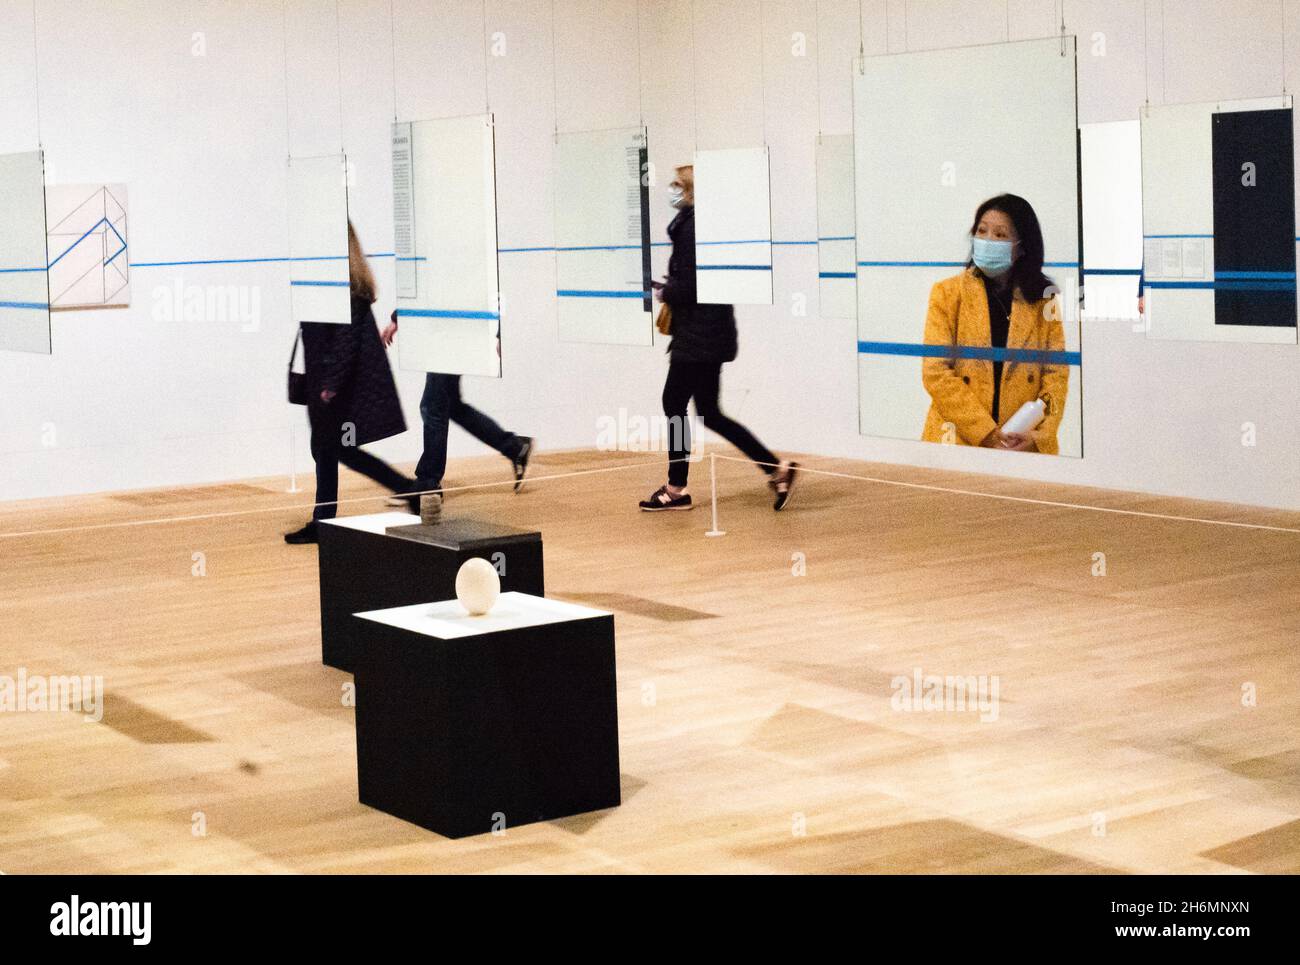 An Asian woman wearing a surgical mask is seen in a mirror as others walk past in a gallery showing an art installation at Tate Modern Stock Photo